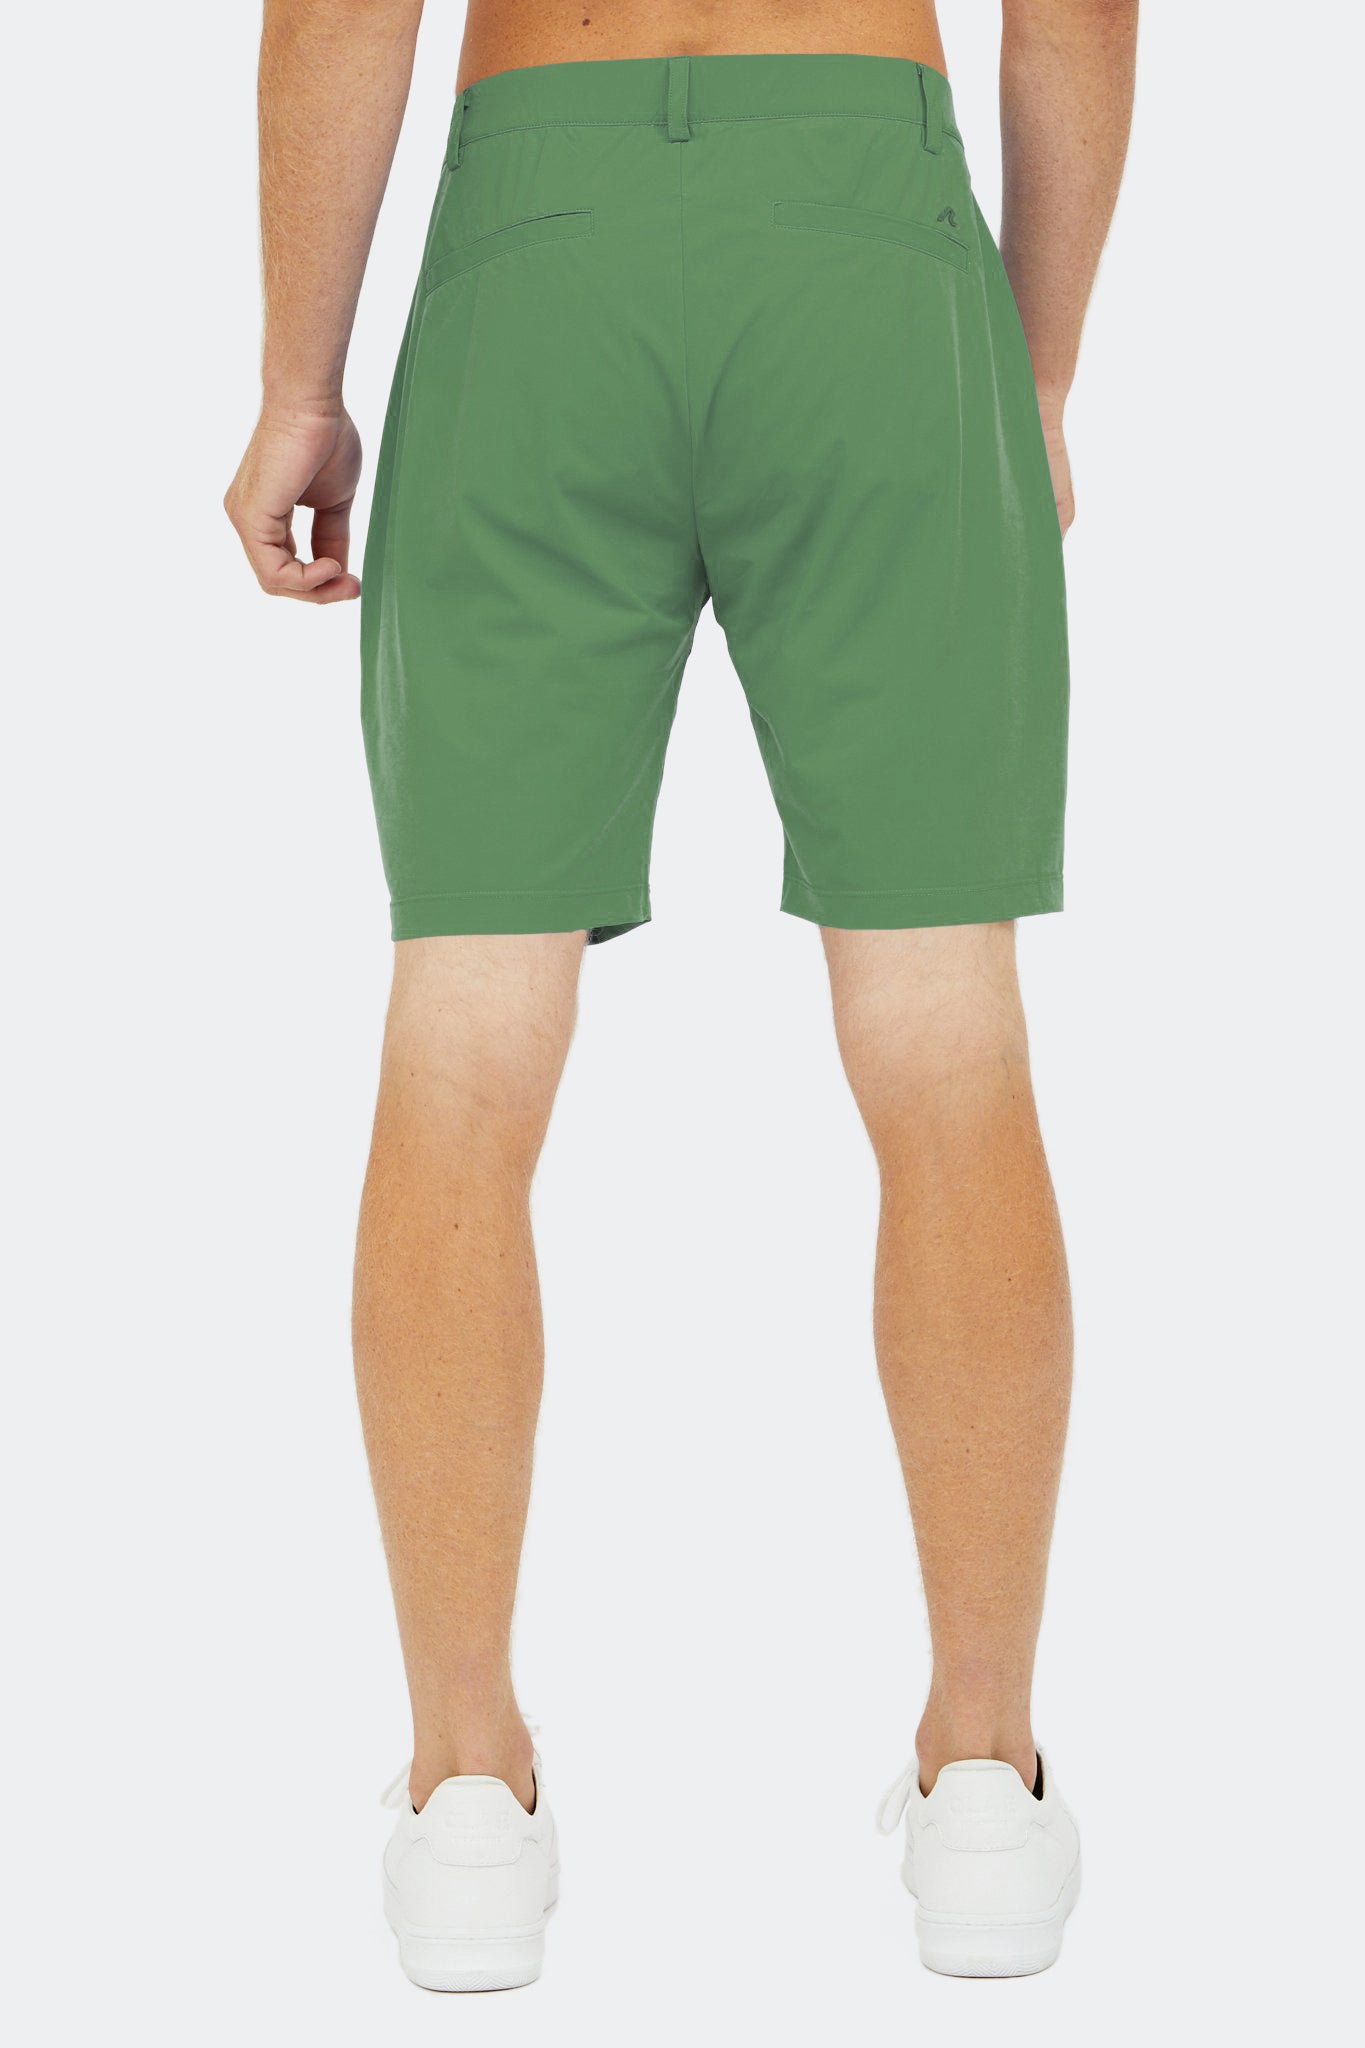 Image of the hanover pull-on golf short in comfrey green